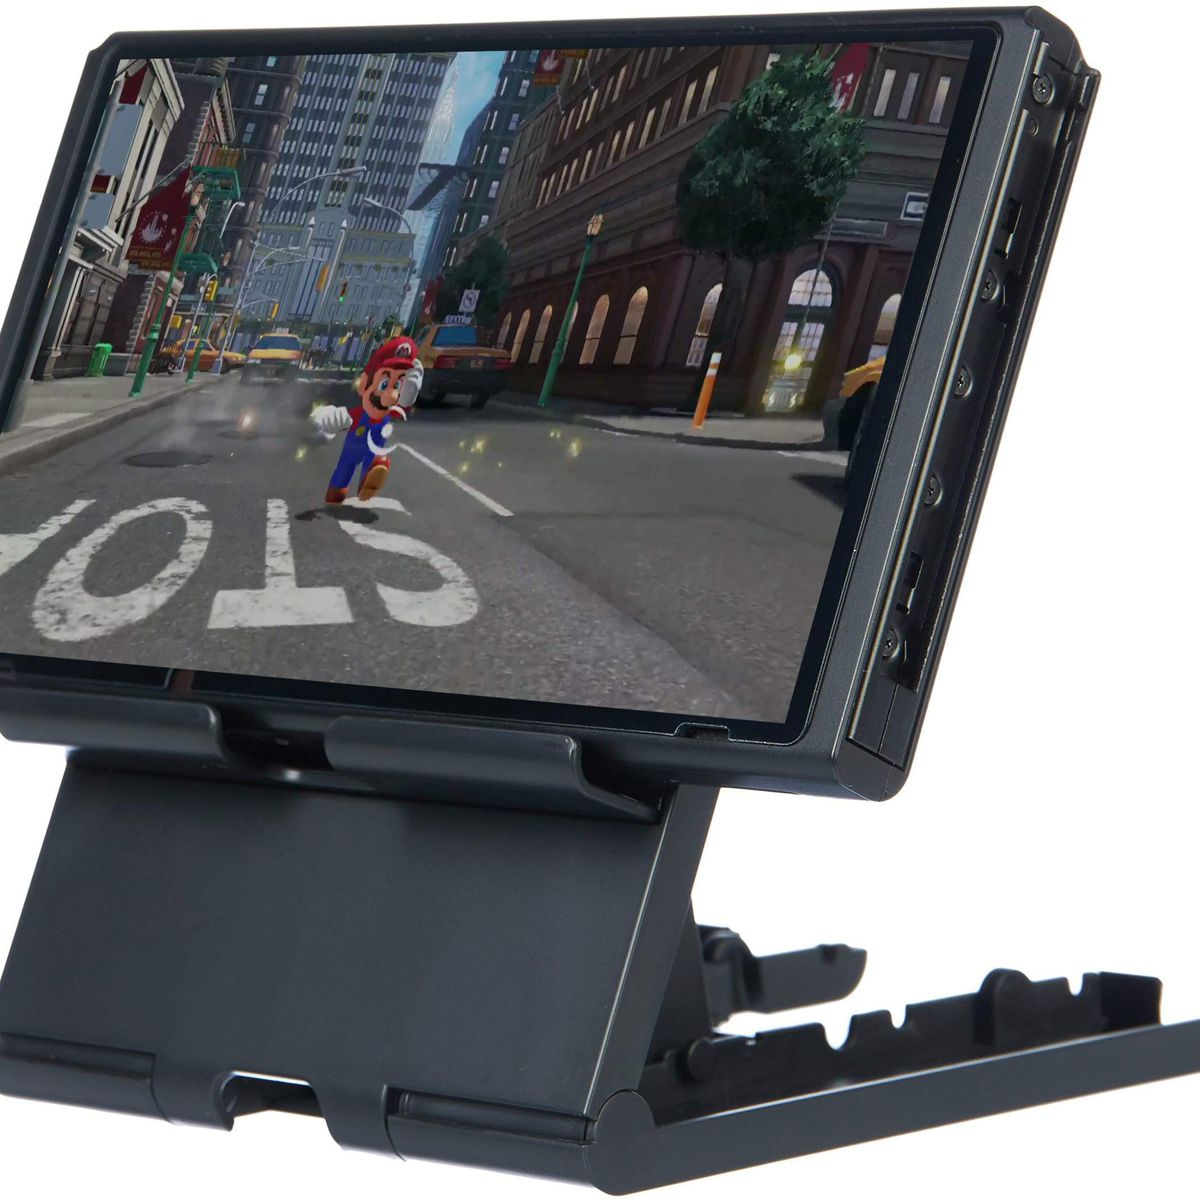 Product shot of a Nintendo Switch console on the the AmazonBasics playstand